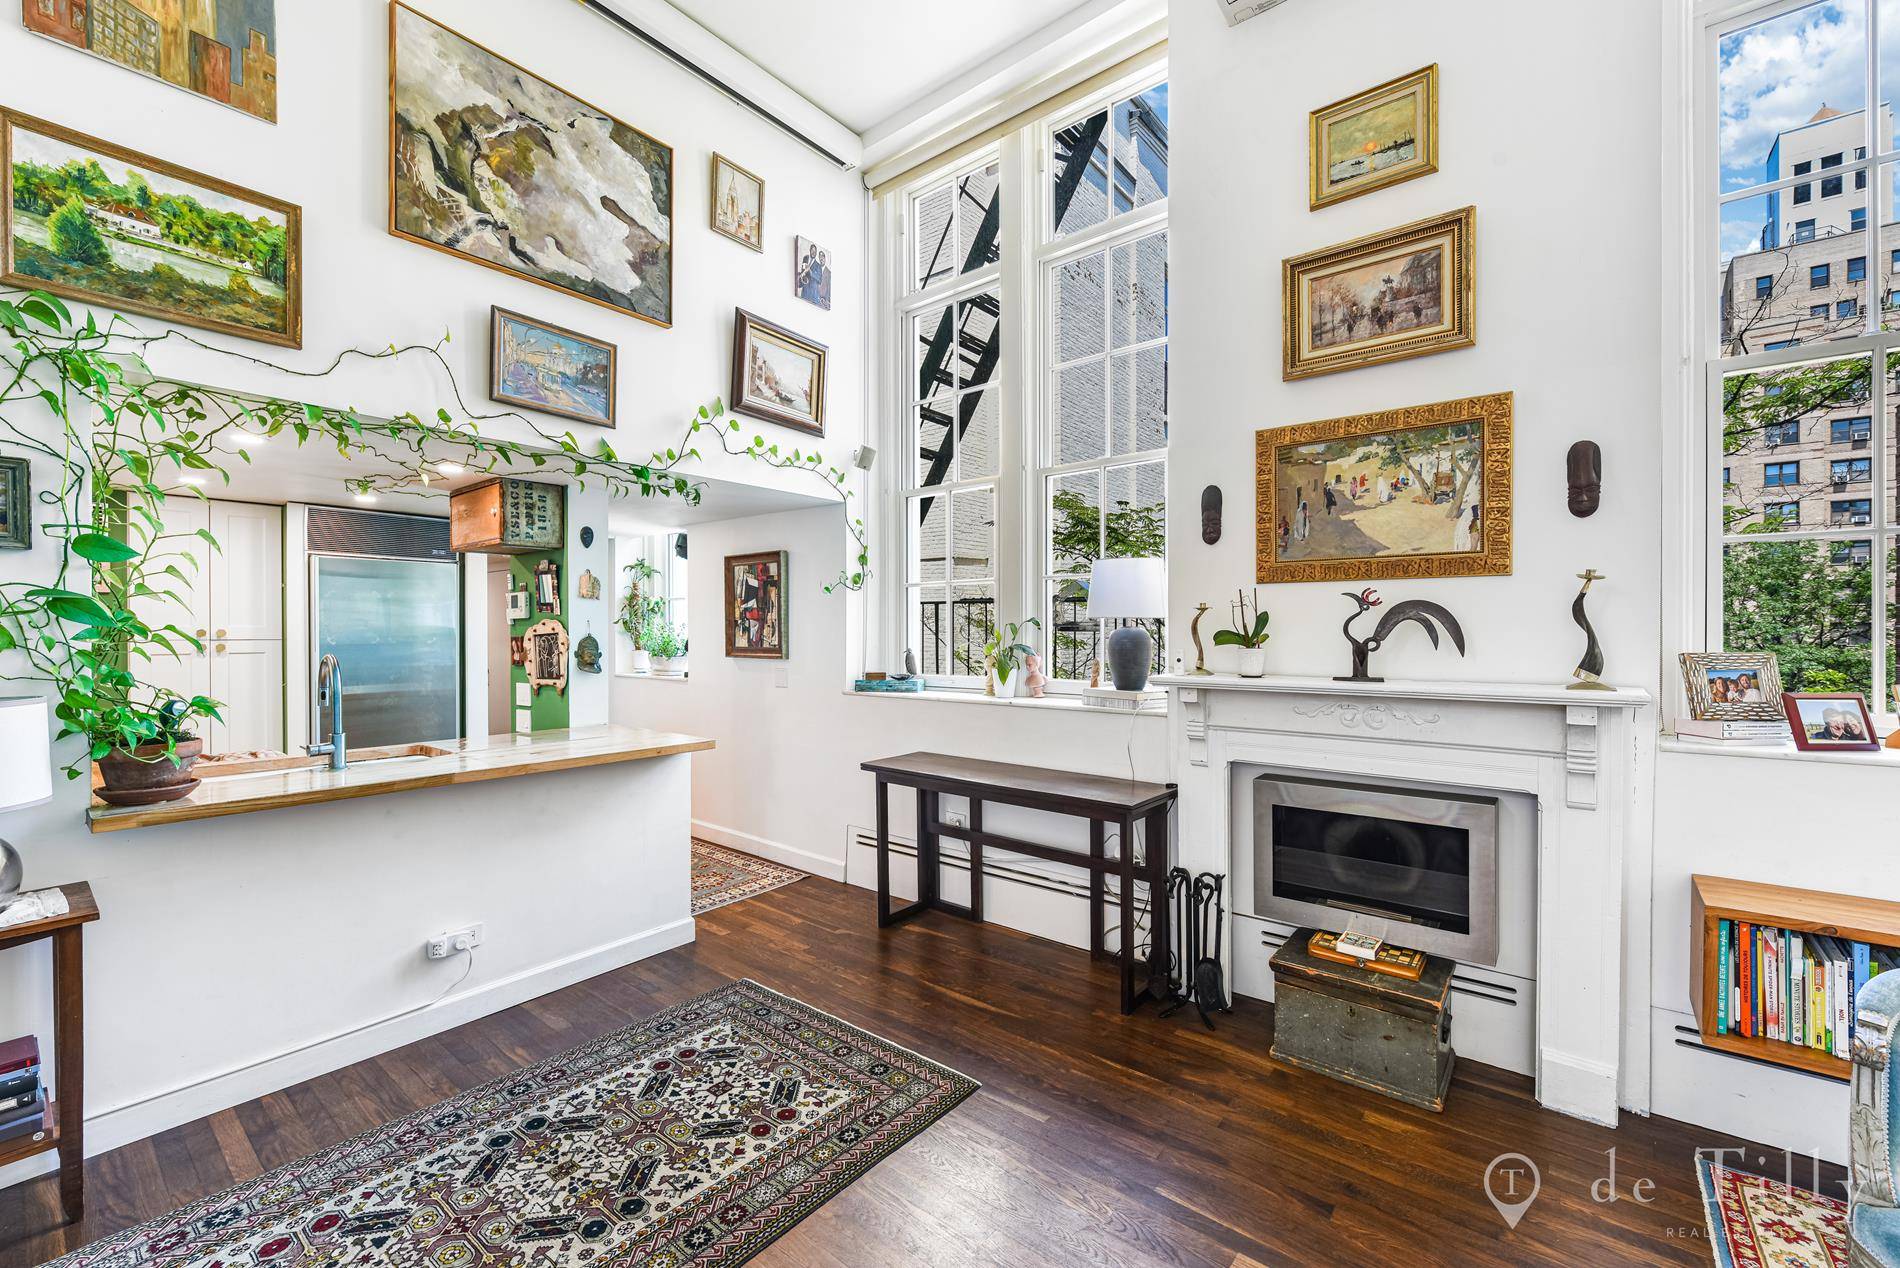 FABULOUS DUPLEX APARTMENT3 BEDROOM 2 BATHROOM CONDO 14 FT HEIGHT CEILINGS HISTORIC 1887 LANDMARK BUILDING IN WEST VILLAGEWelcome to this exceptional duplex apartment nestled within a historic landmark Queen Anne ...